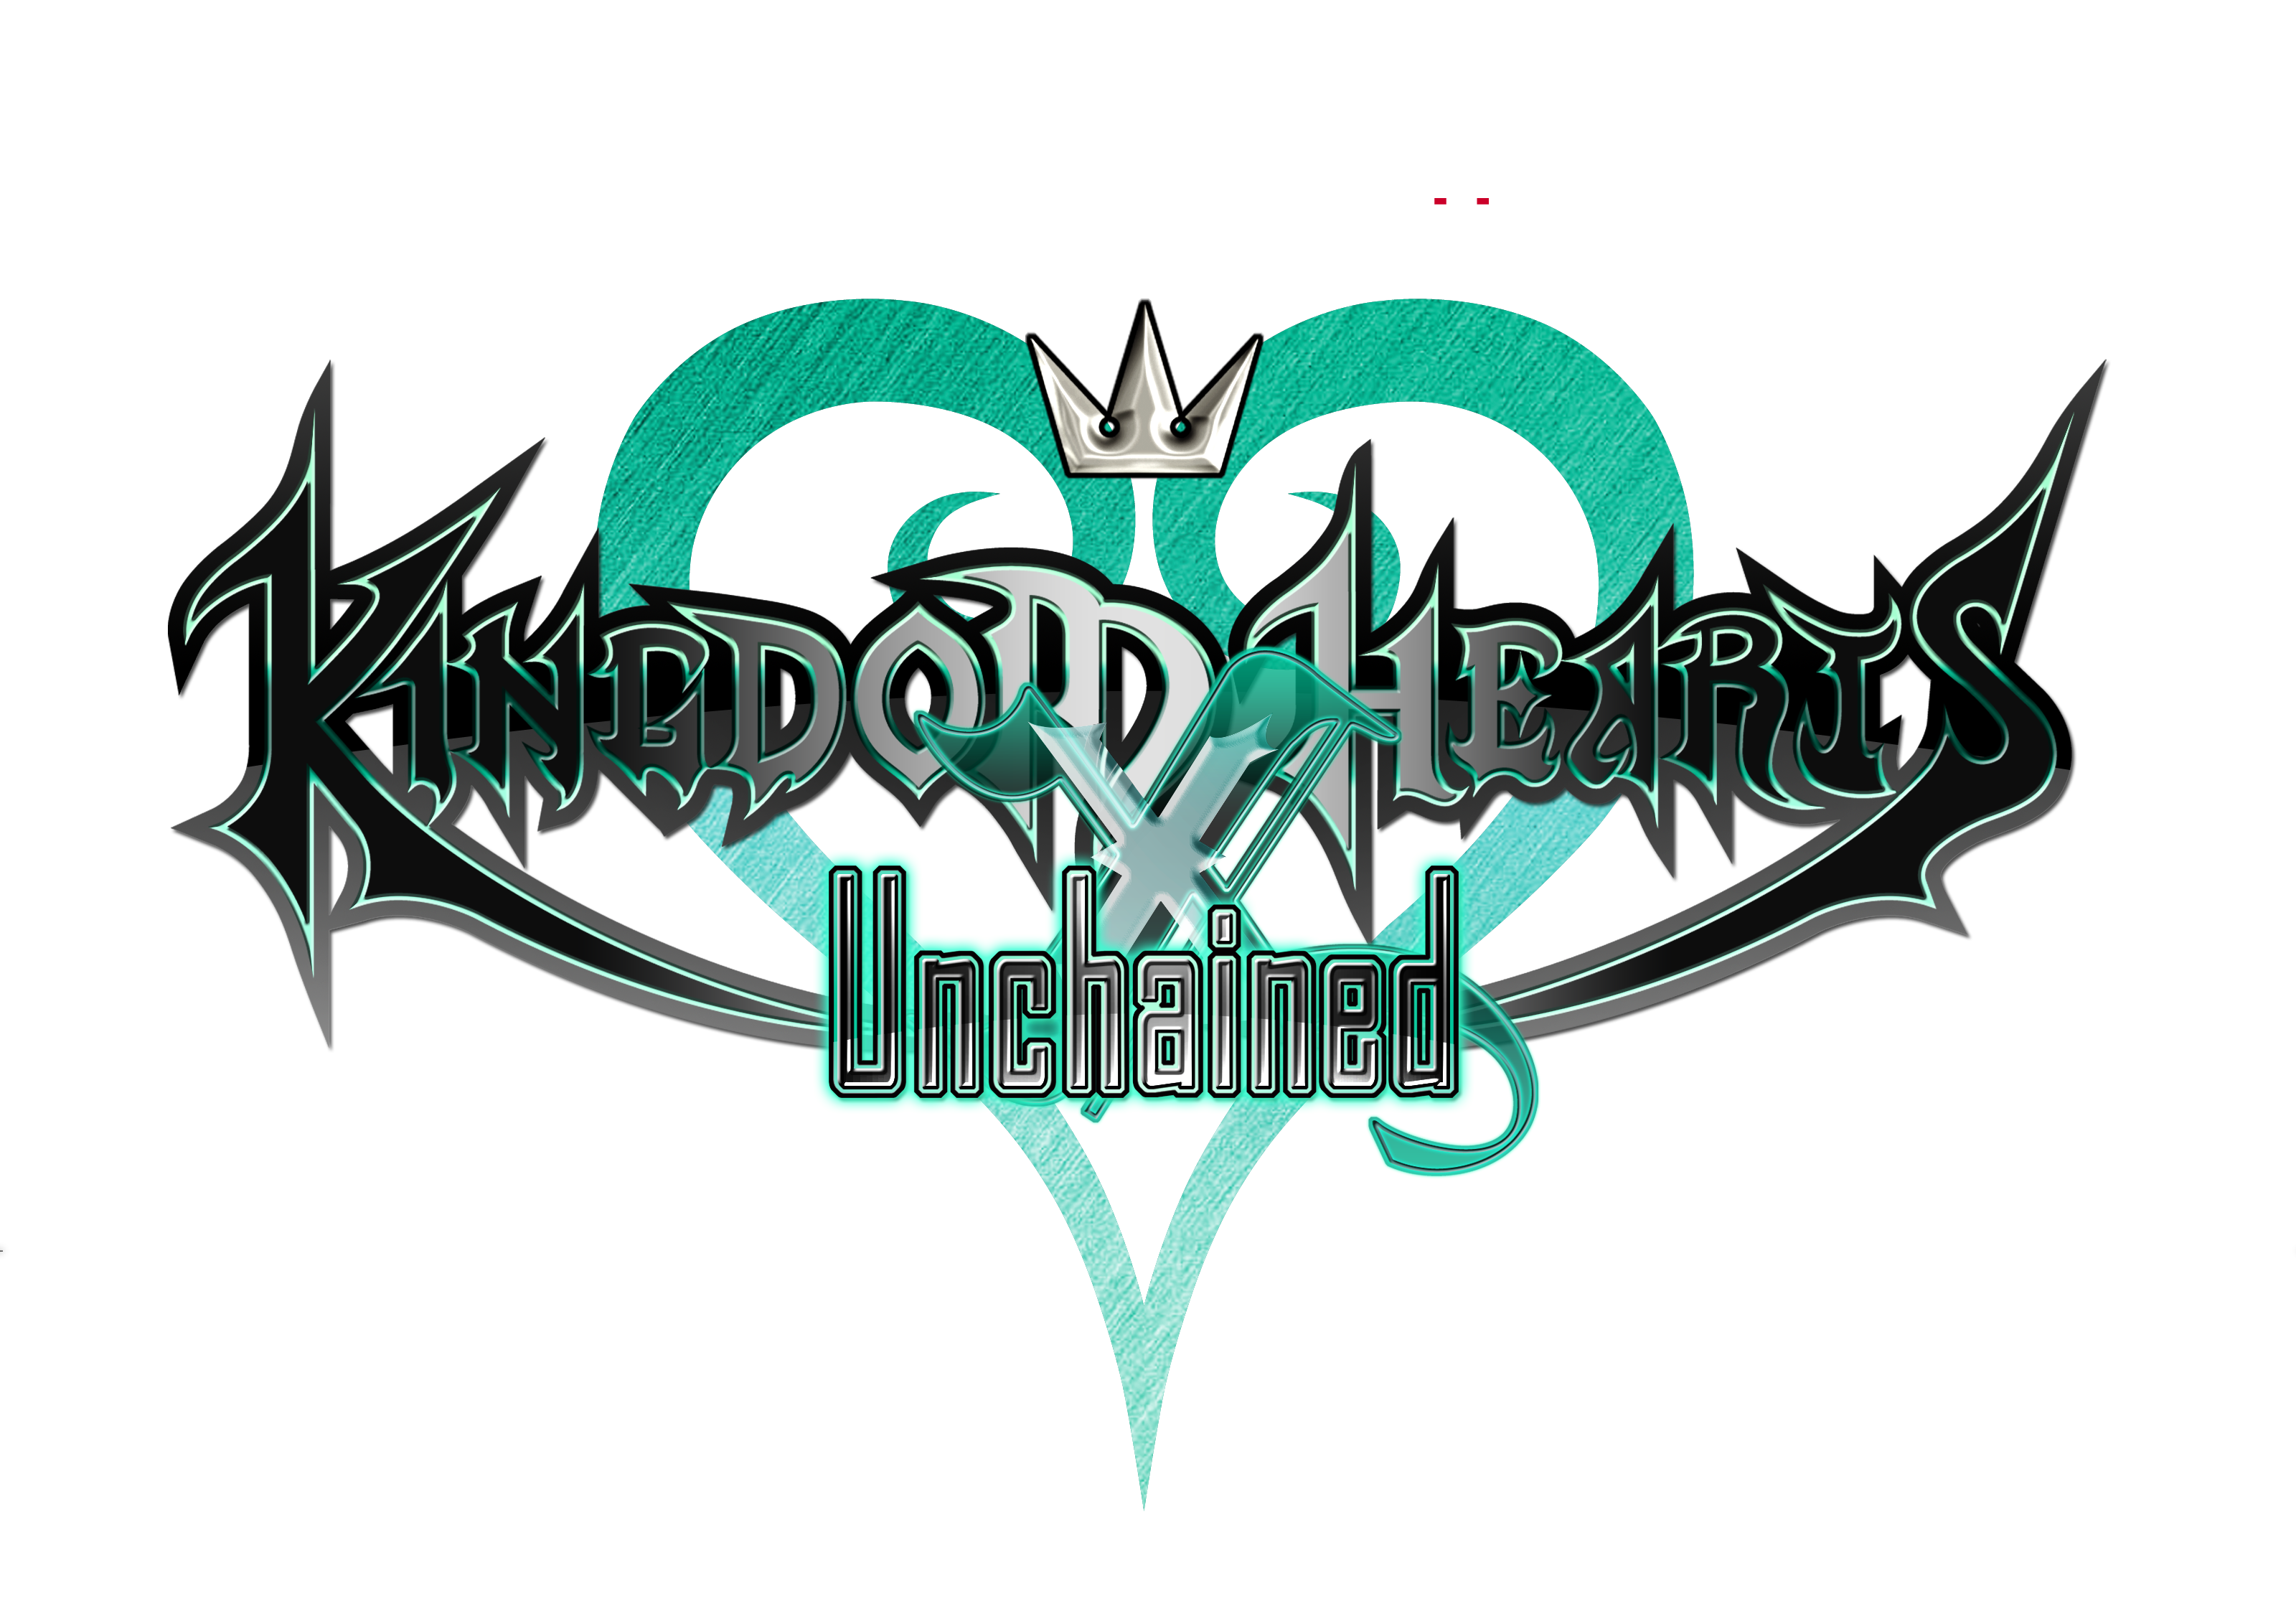 New Kingdom Hearts Adventure Available Now on Mobile Devices